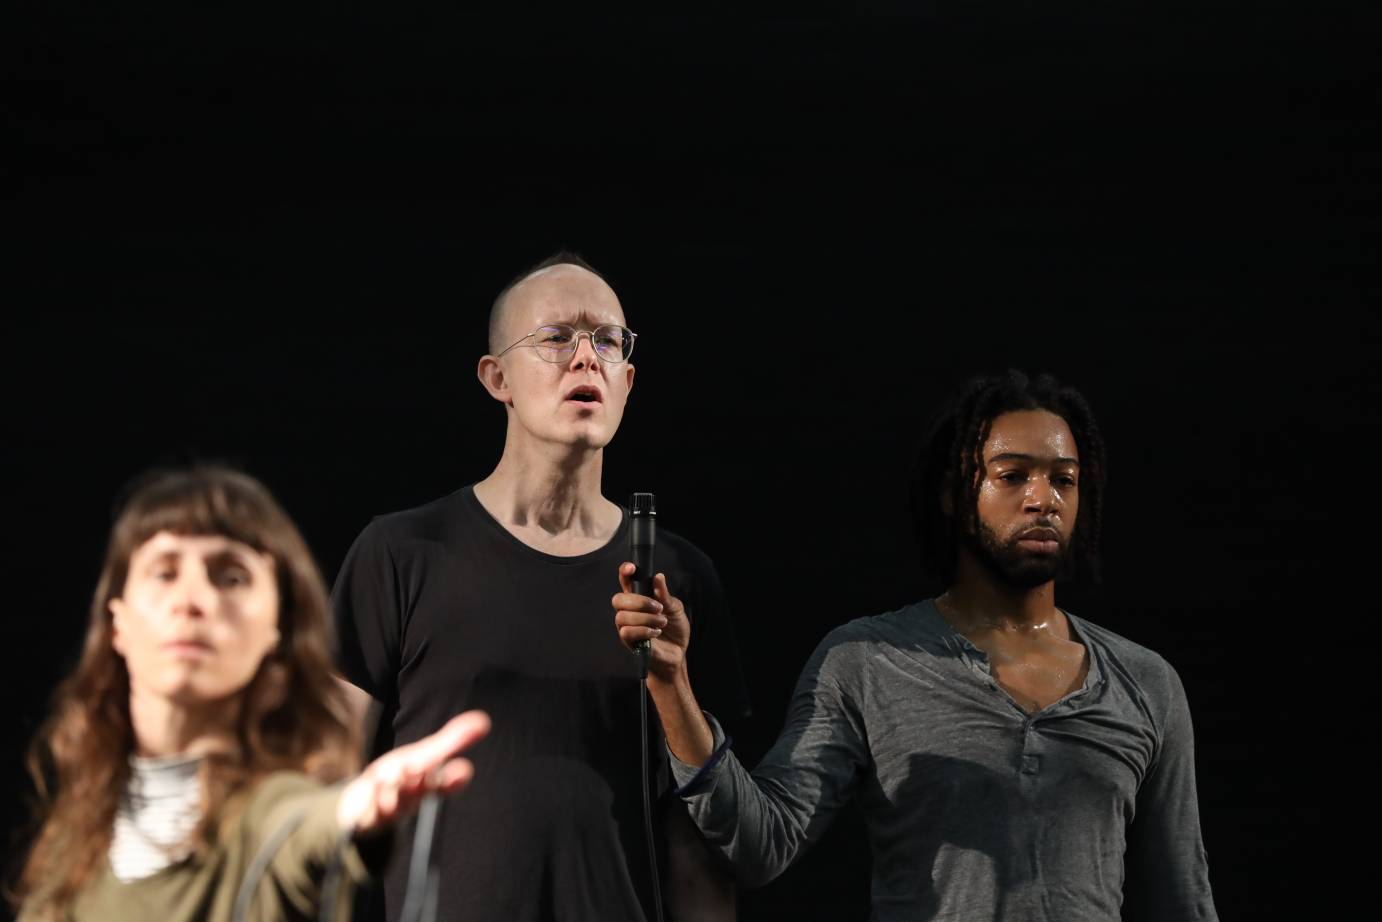 a trio consisting of  ( from l to r) an out of focus white woman with bangs reaching to her front, a spectacled and bald white man in a black t-shirt, and a lightly-bearded mustached black man in a grey henley shirt lifting up a mic to the guy in the center